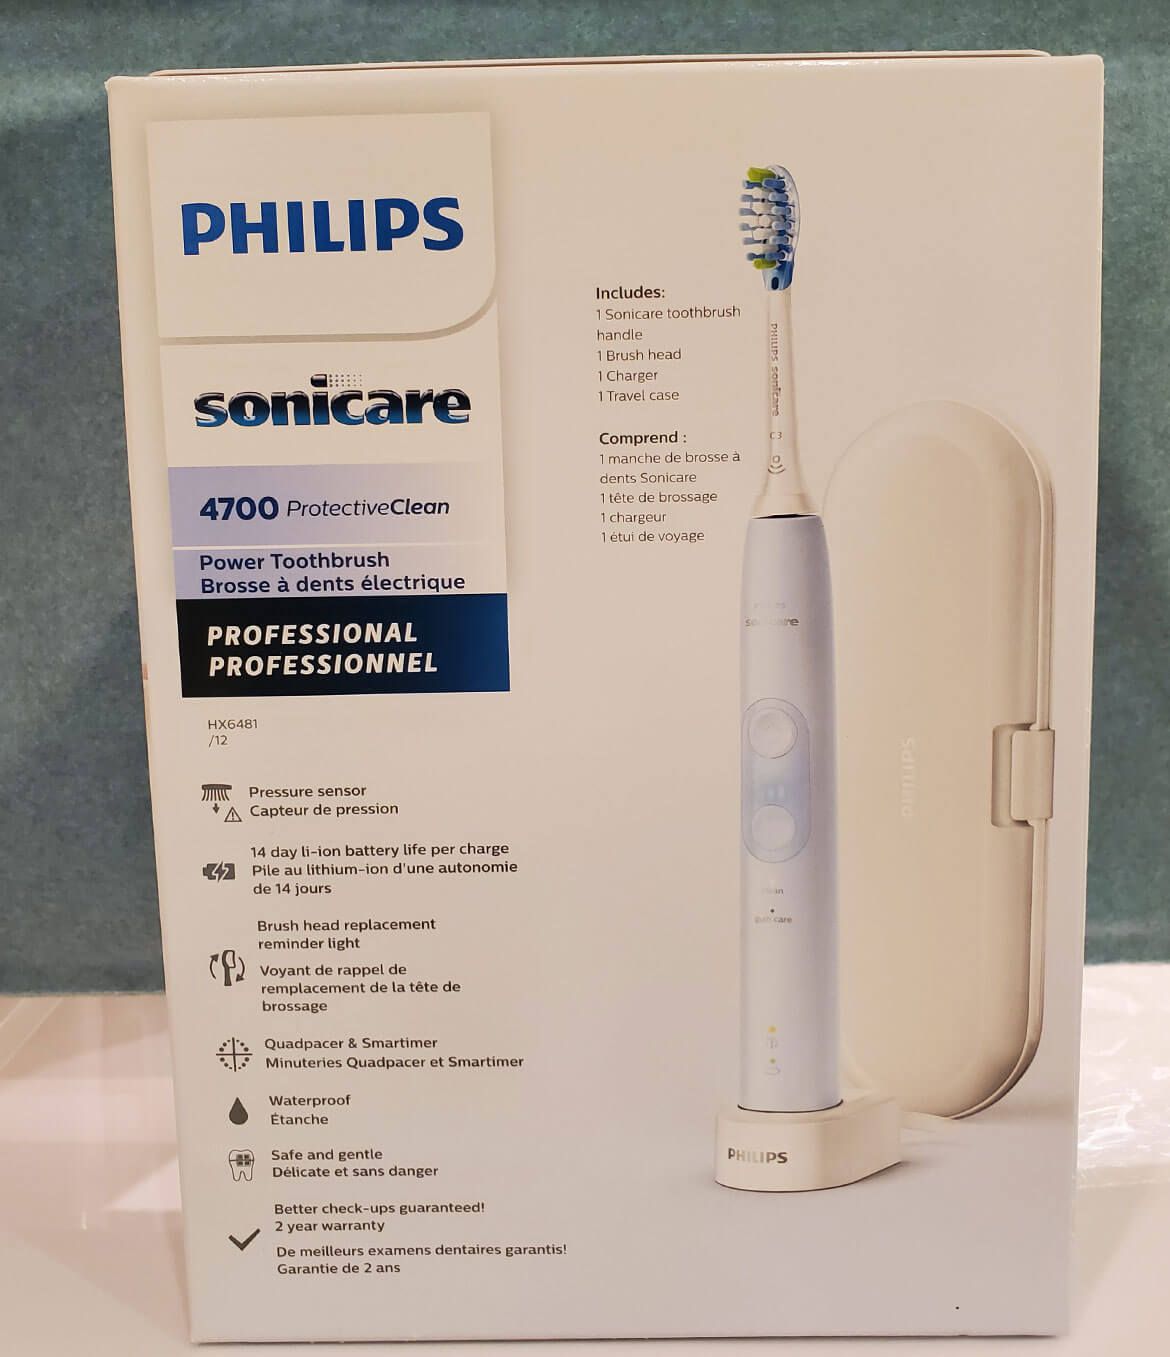 4700 Sonicare Protective Clean Power Toothbrush Light Teal